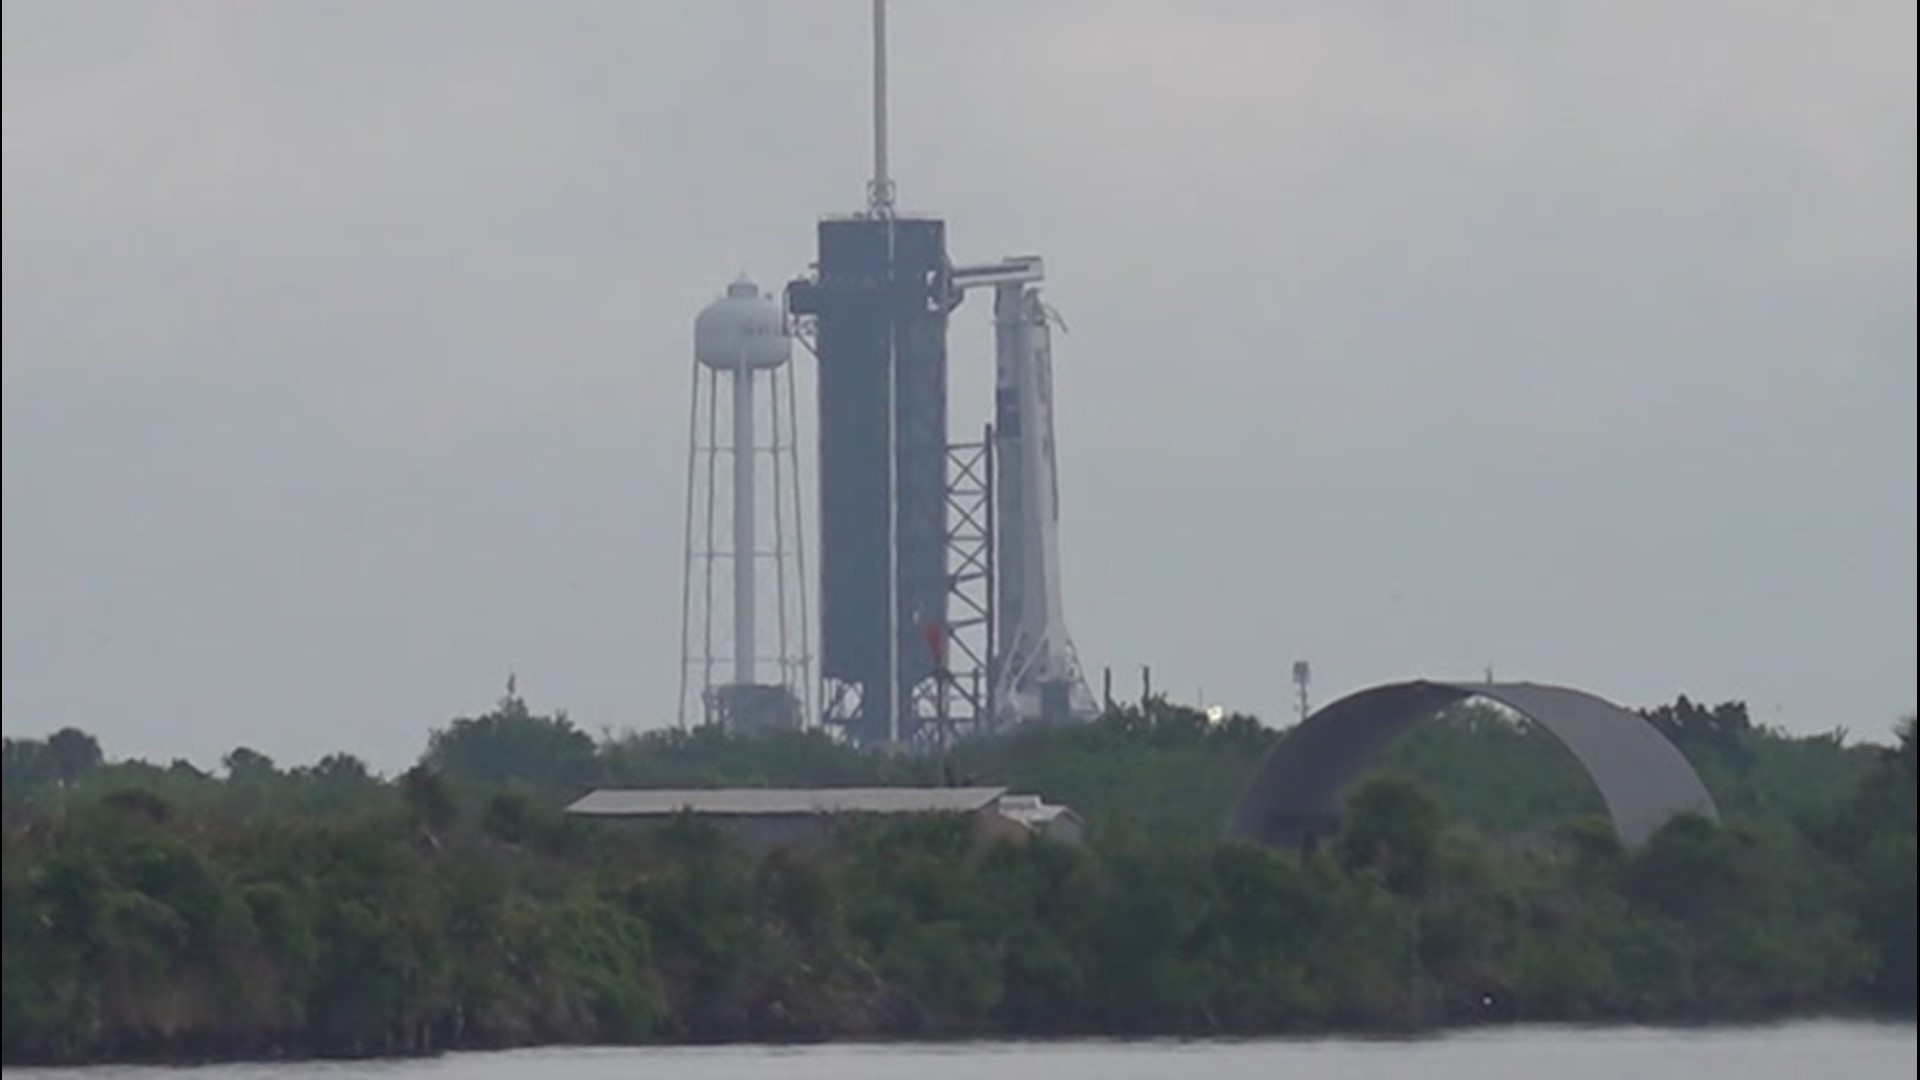 NASA officials made the decision to delay the launch on Wednesday morning. The new launch time is set for Friday morning.